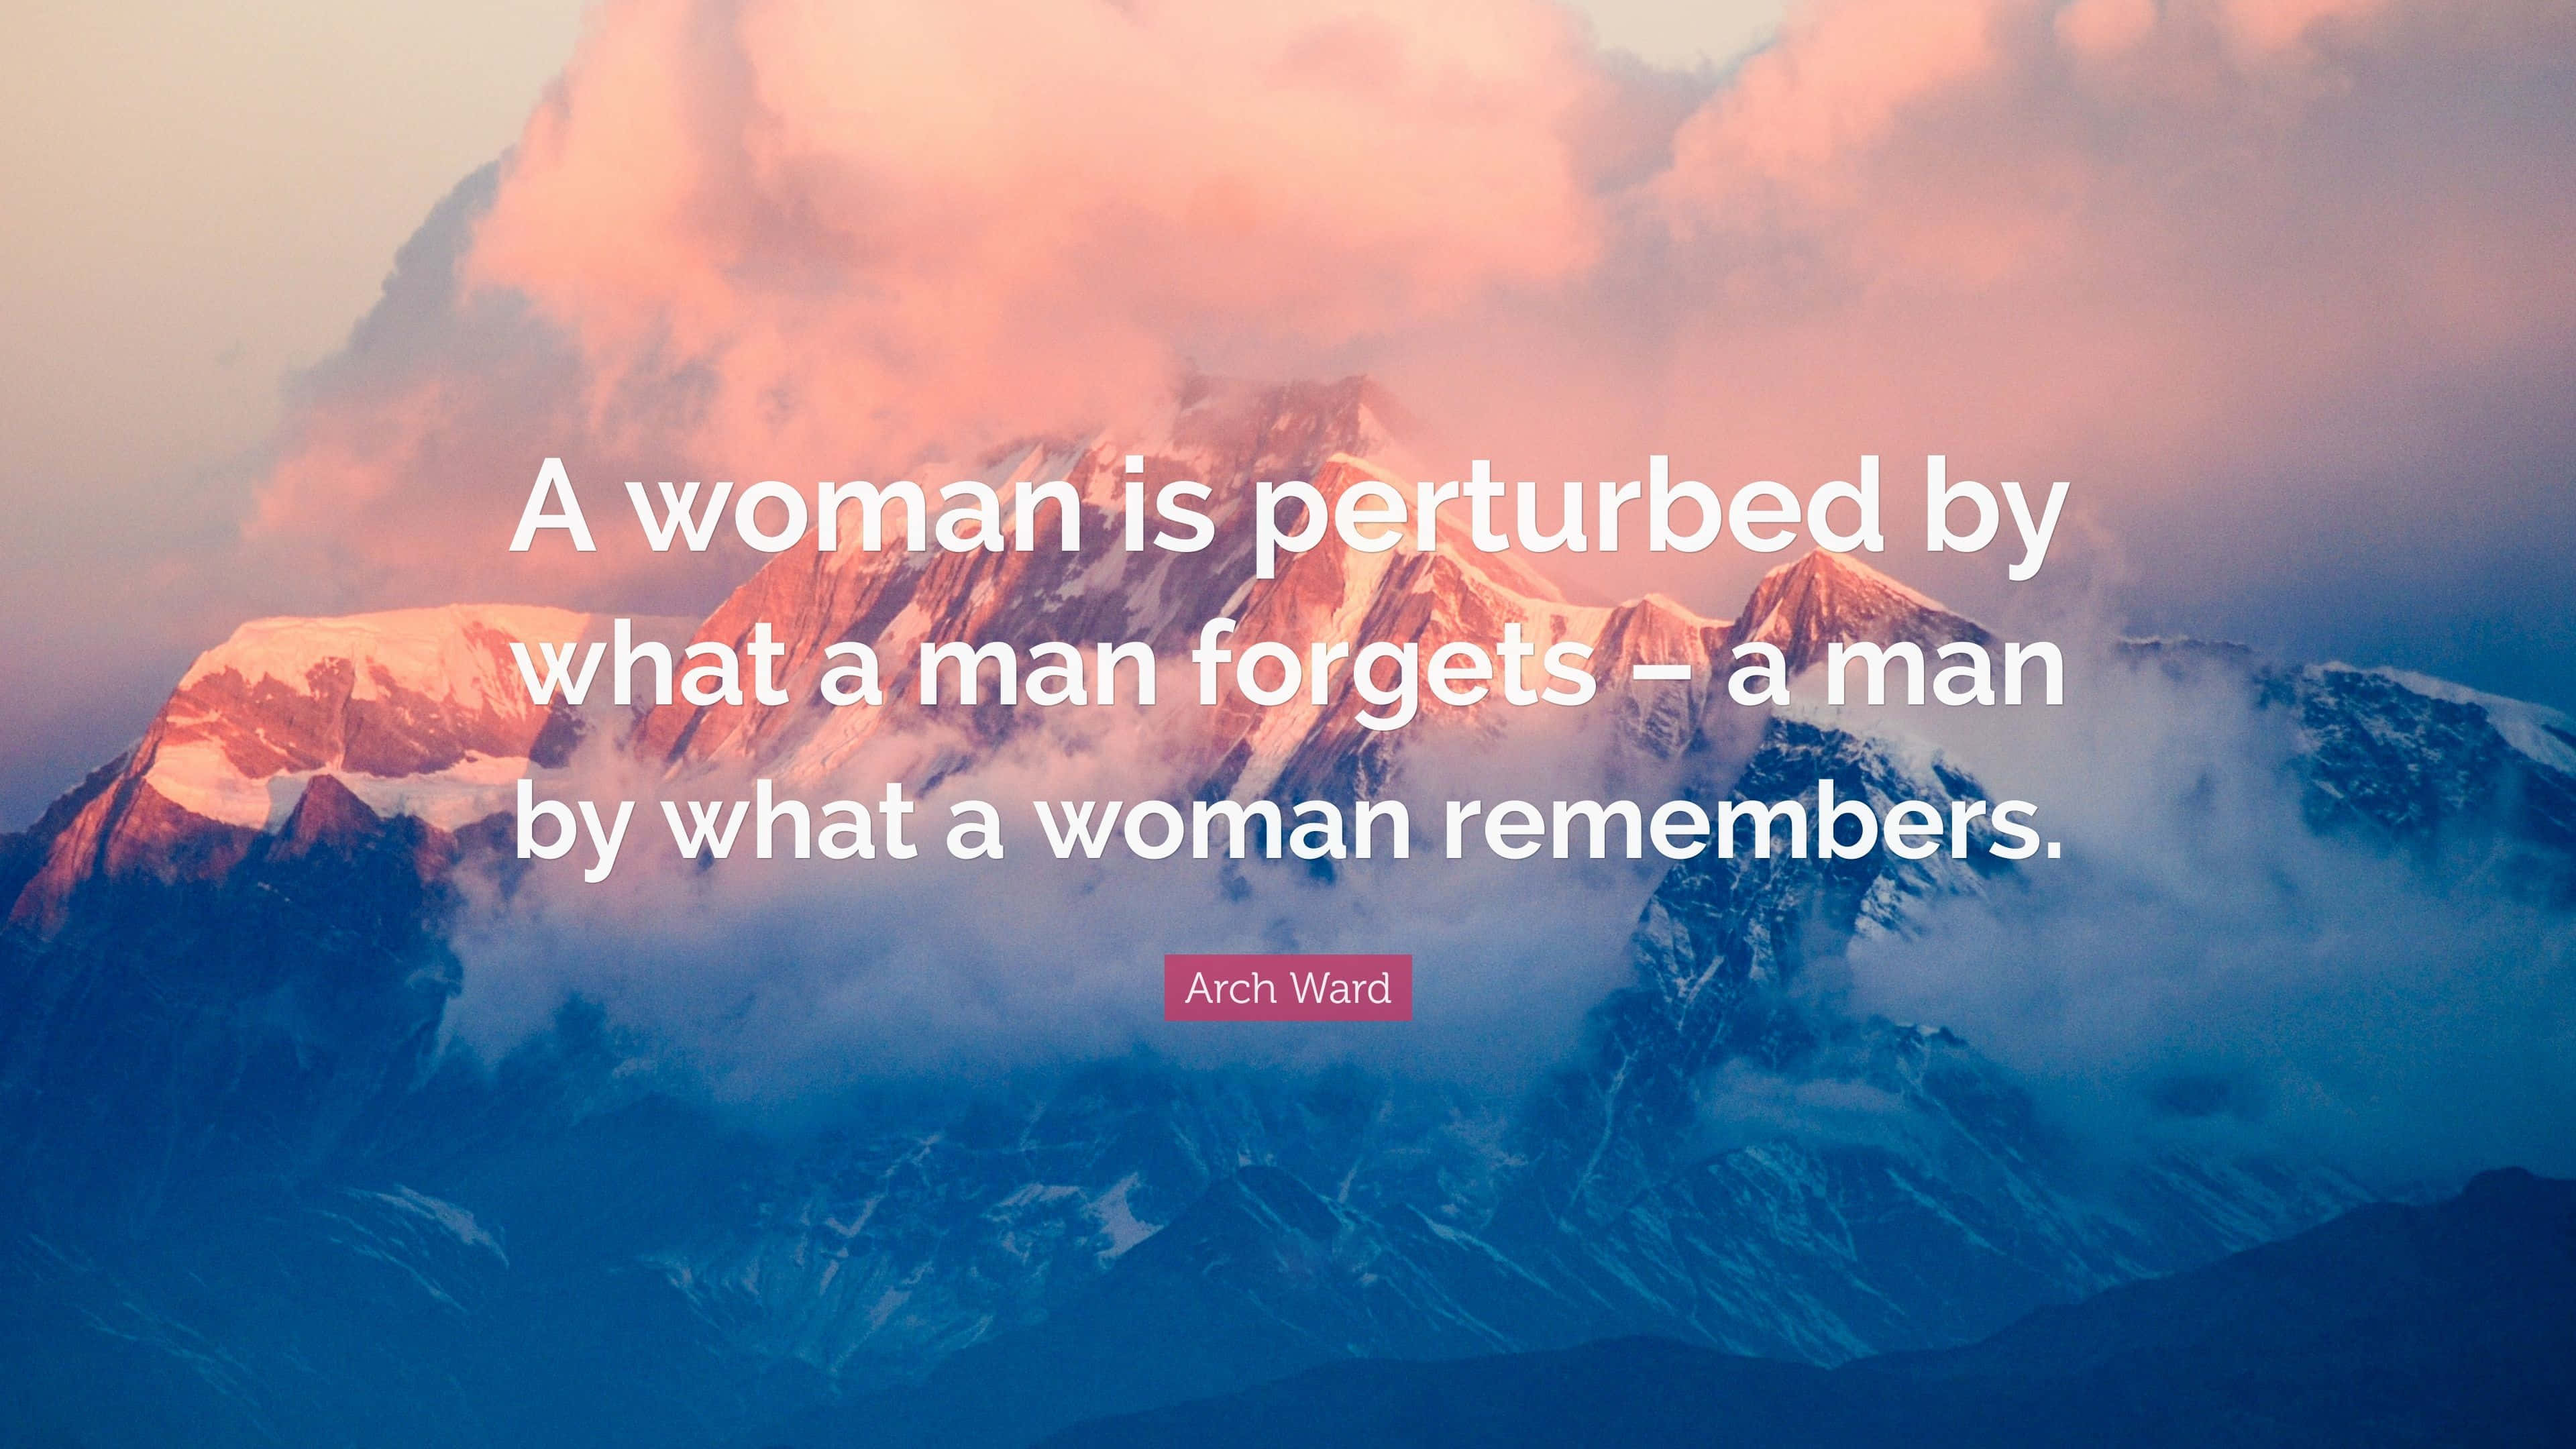 Woman Is Perturbed Quote Wallpaper